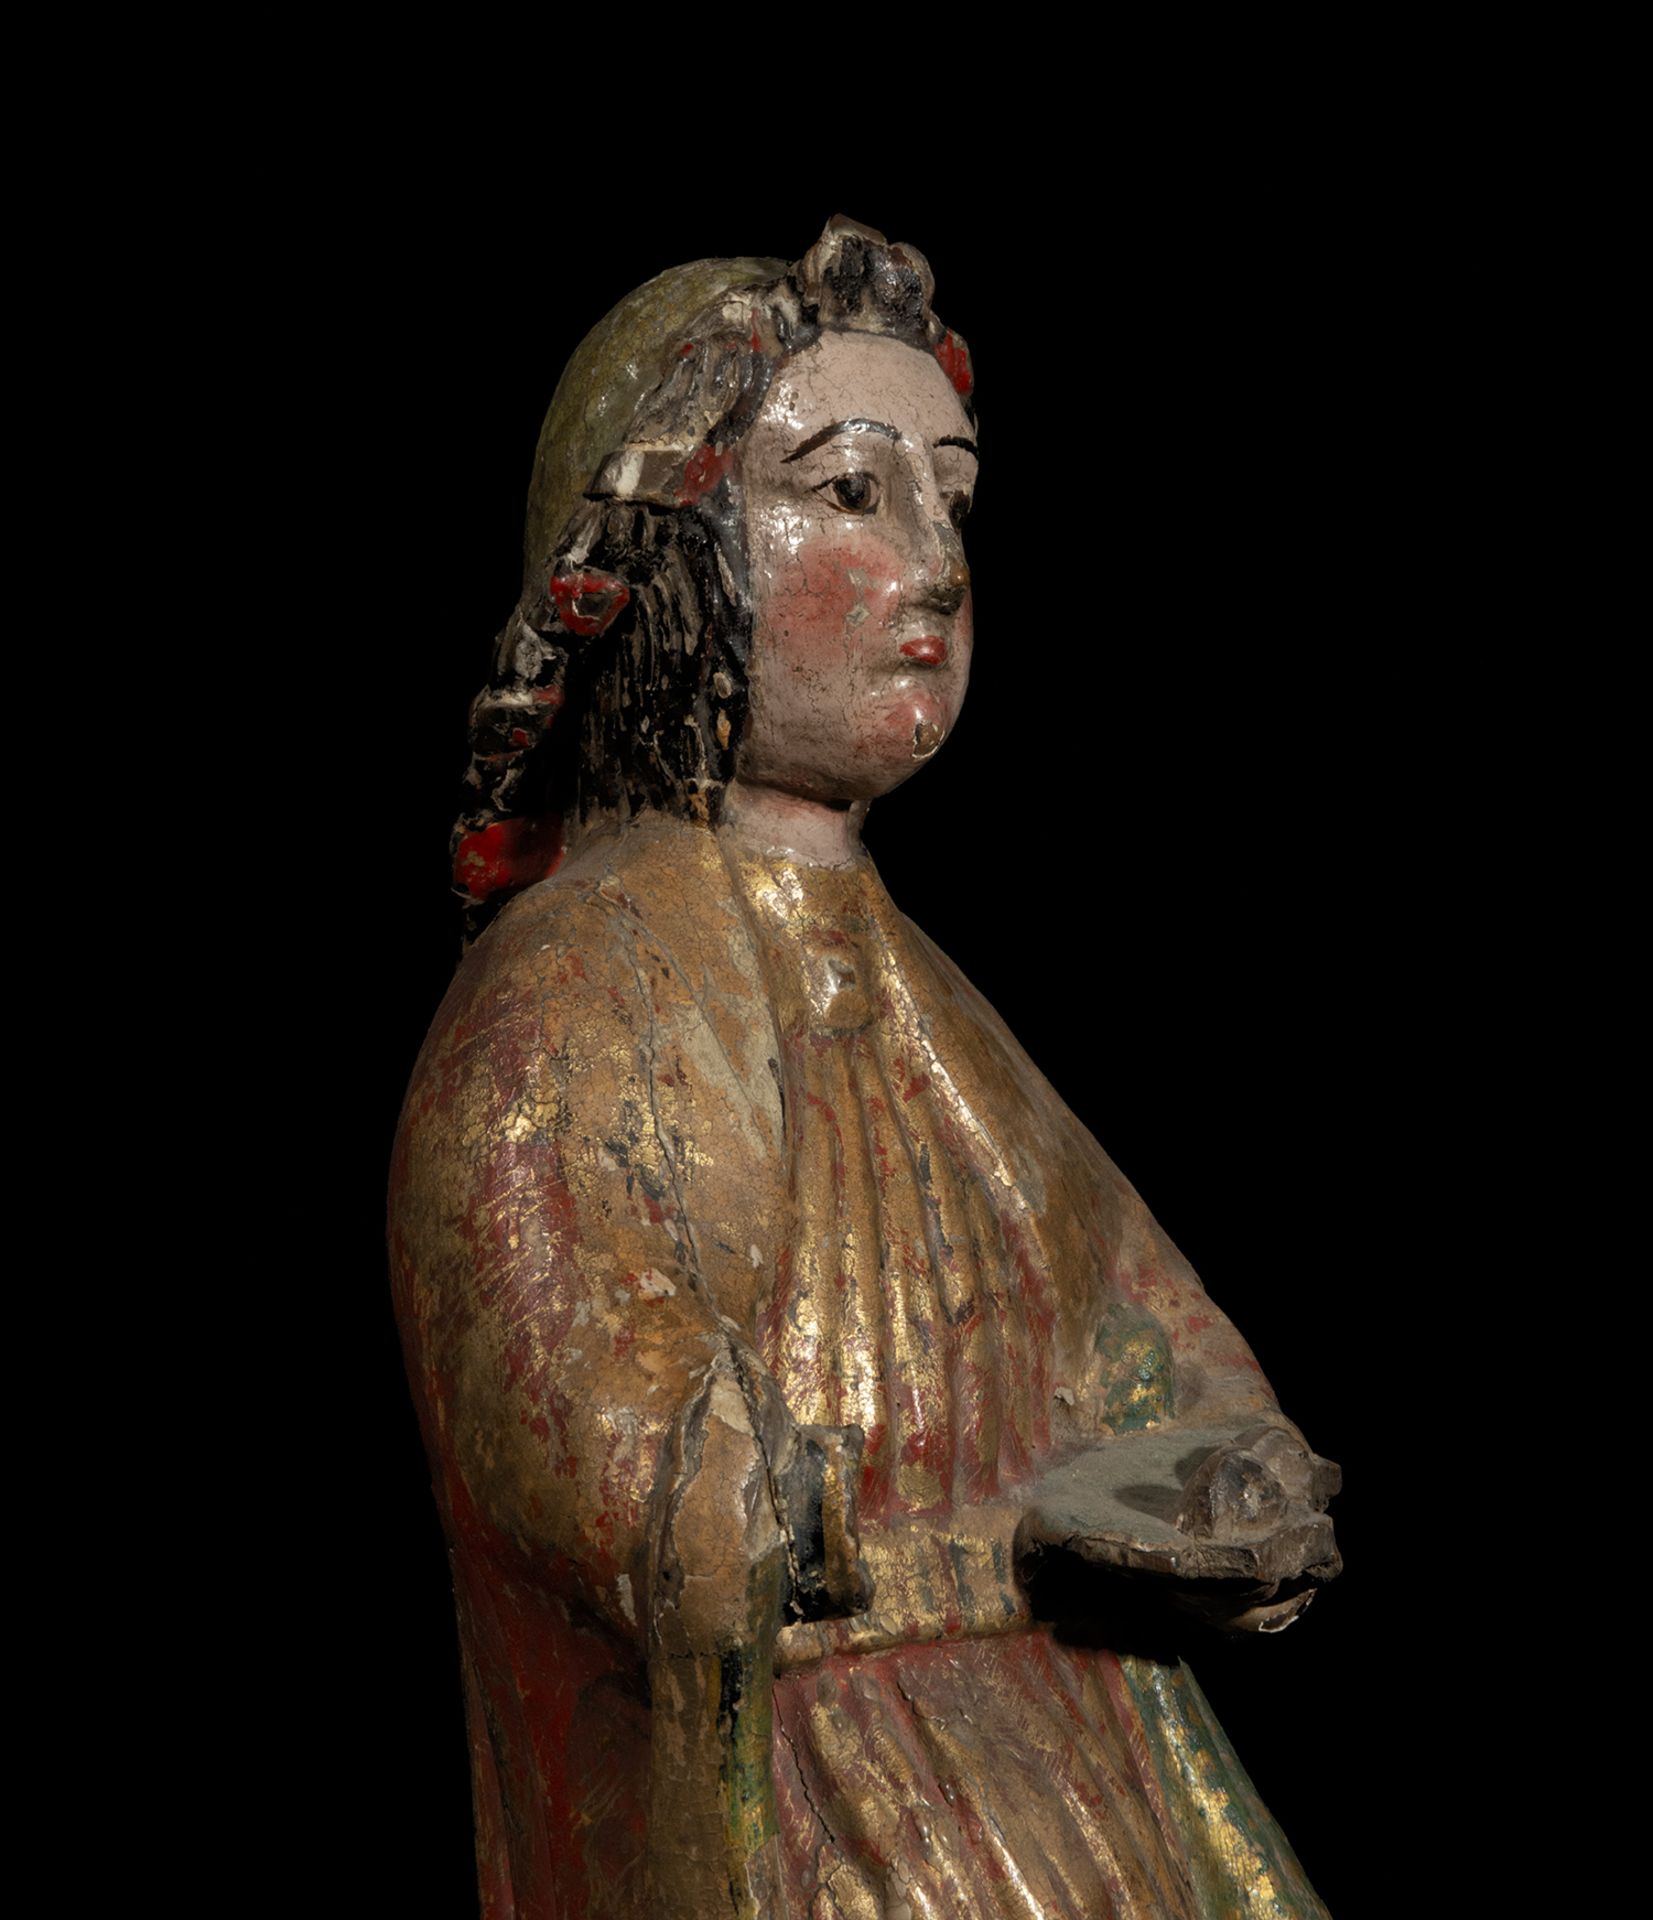 Rare Saint Agathe in carved wood, Viceregal colonial work from the 17th century - Image 4 of 5